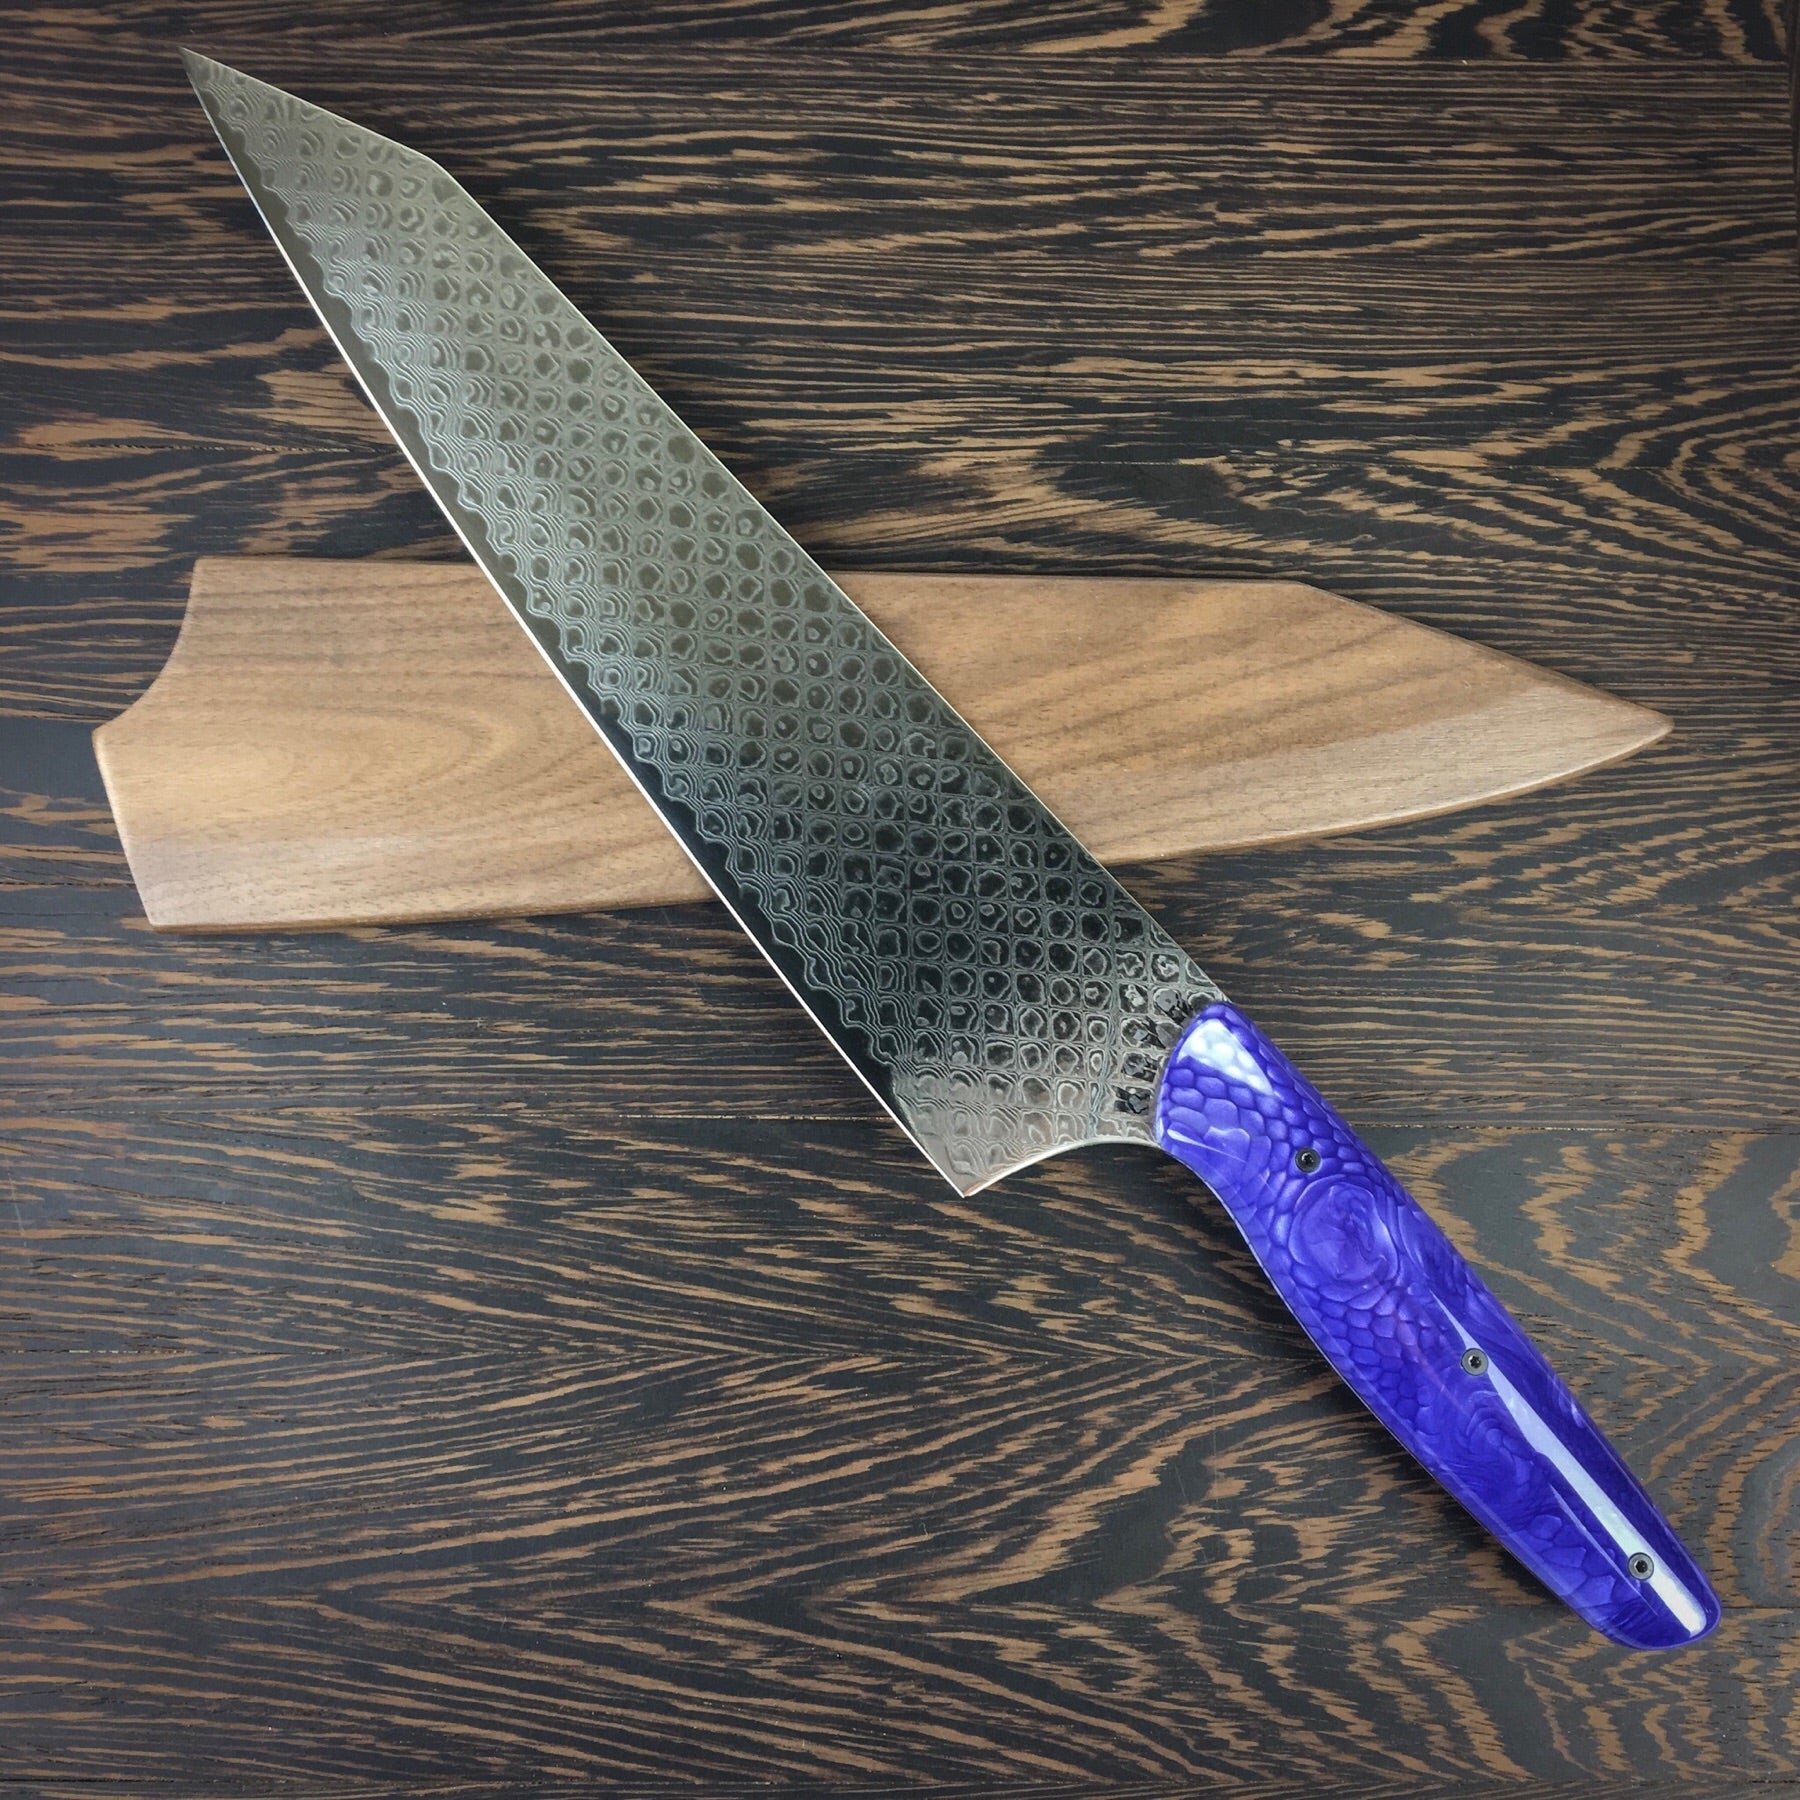 Purple Dragon Smooth - Dragonscale Damascus - Smooth Dragonscale Handle